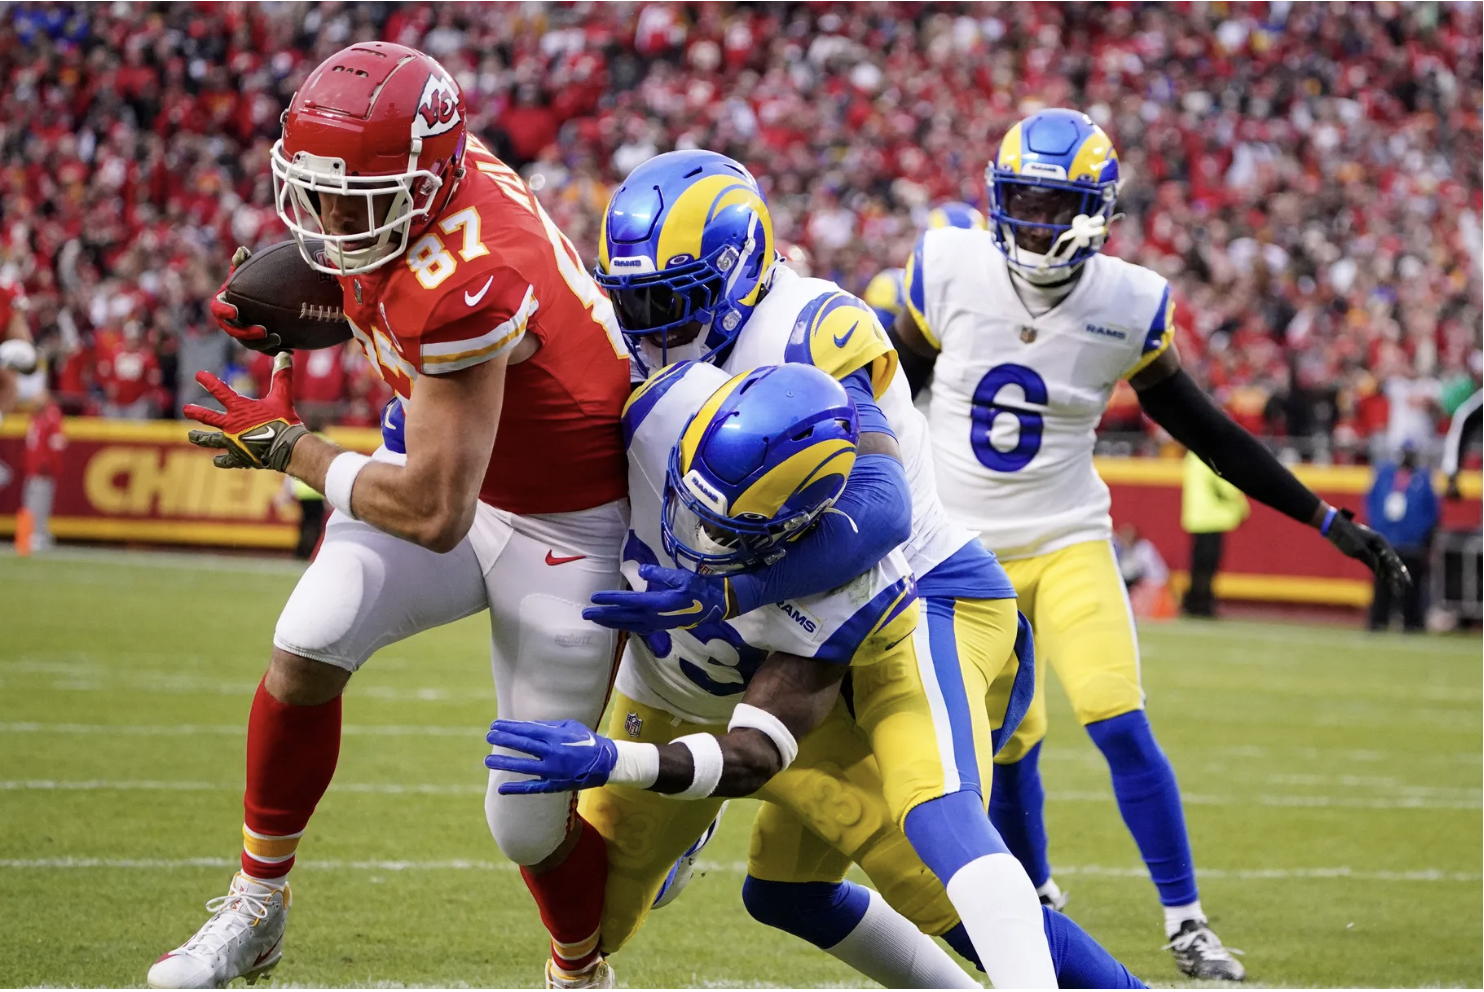 Chiefs – Rams (26 – 10): Kansas City provides the essentials without forcing